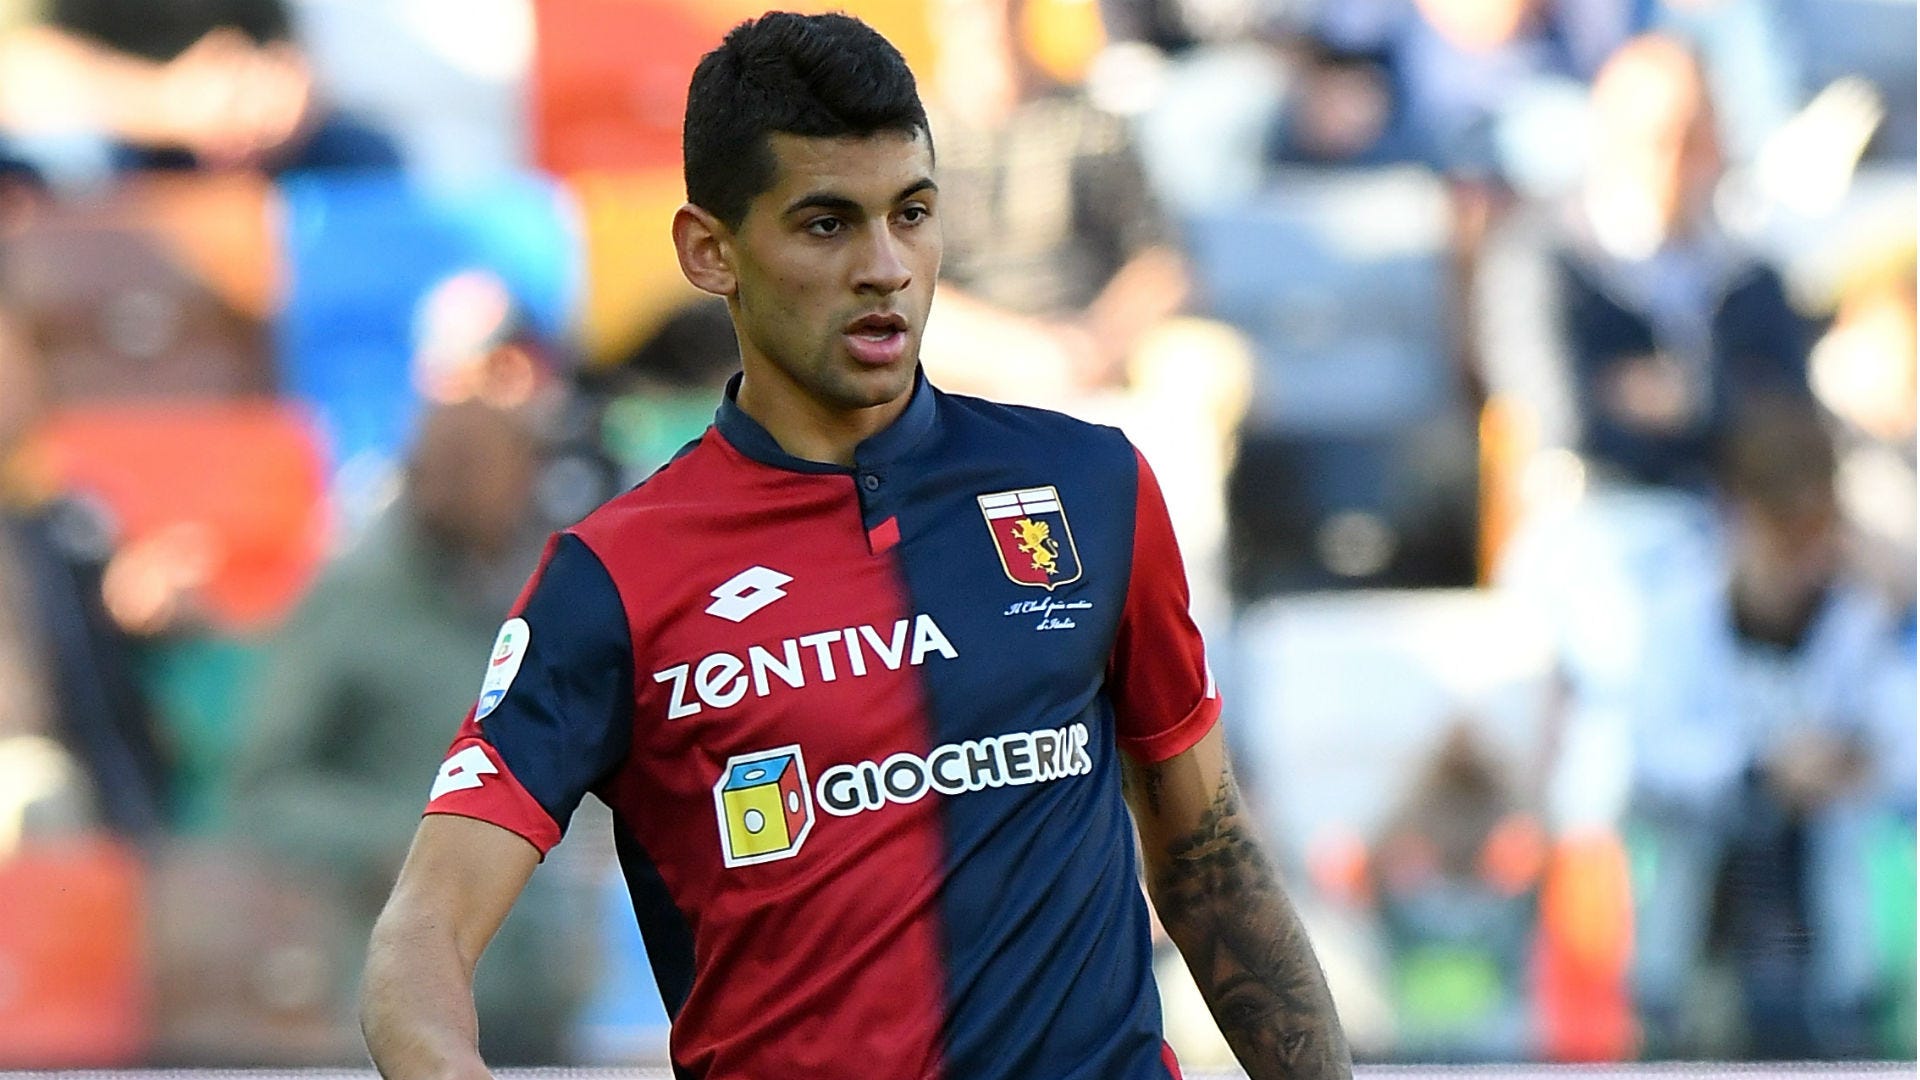 OFFICIALLY OFFICIAL: Juventus sign Cristian Romero, loan him back to Genoa  - Black & White & Read All Over